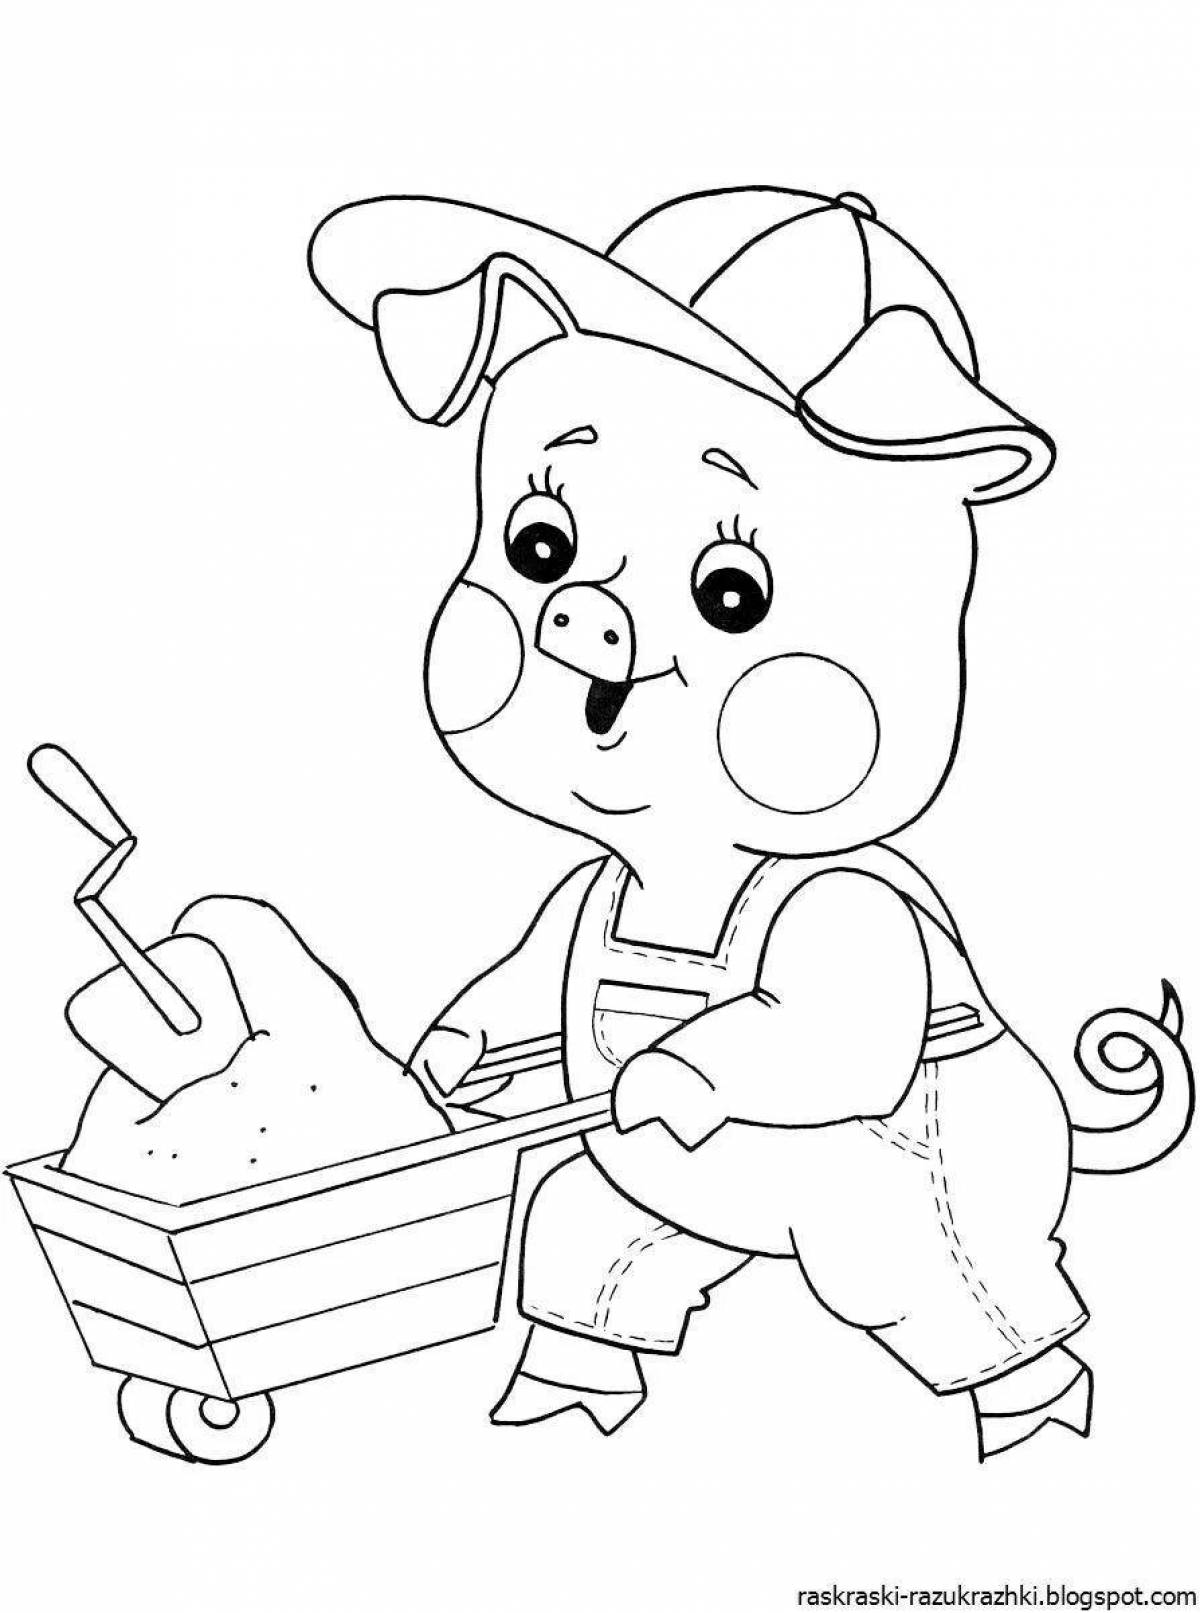 Joyful three little pigs coloring book for kids